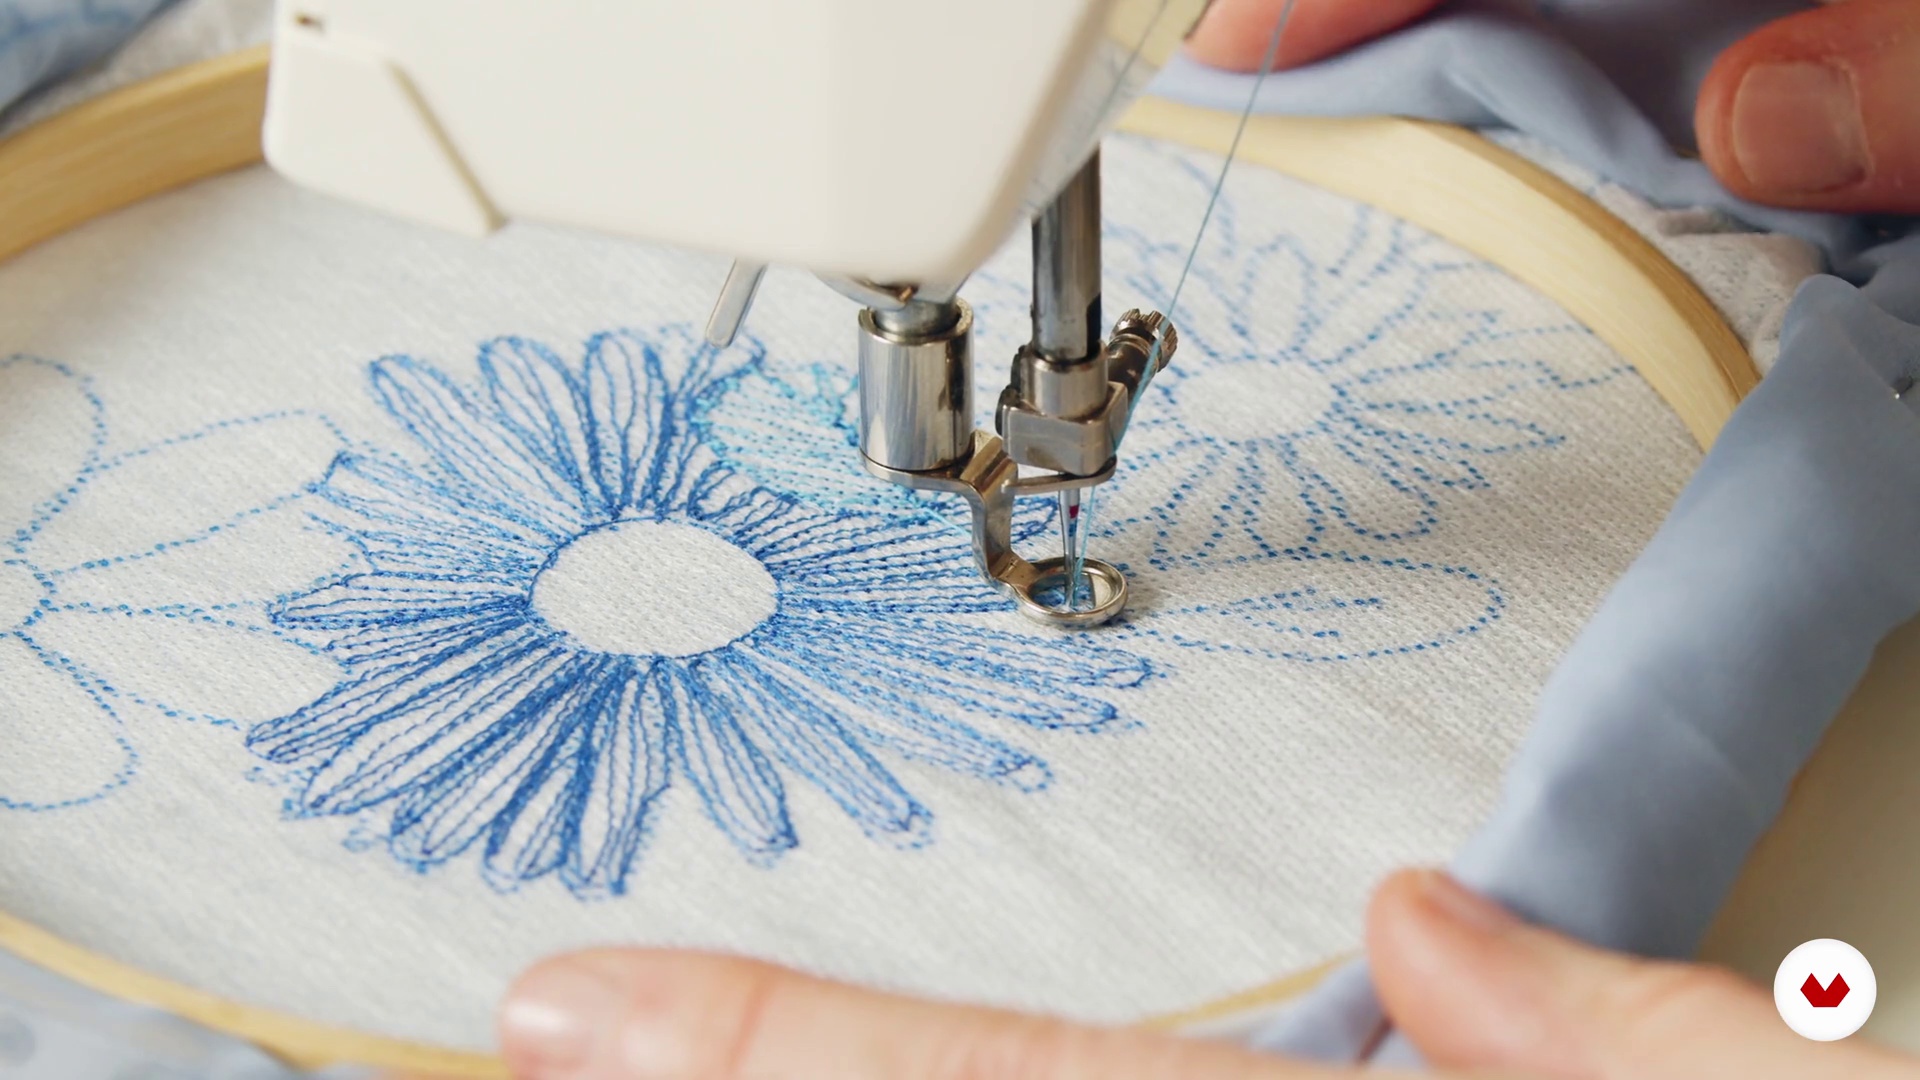 Embroidery with a sewing machine